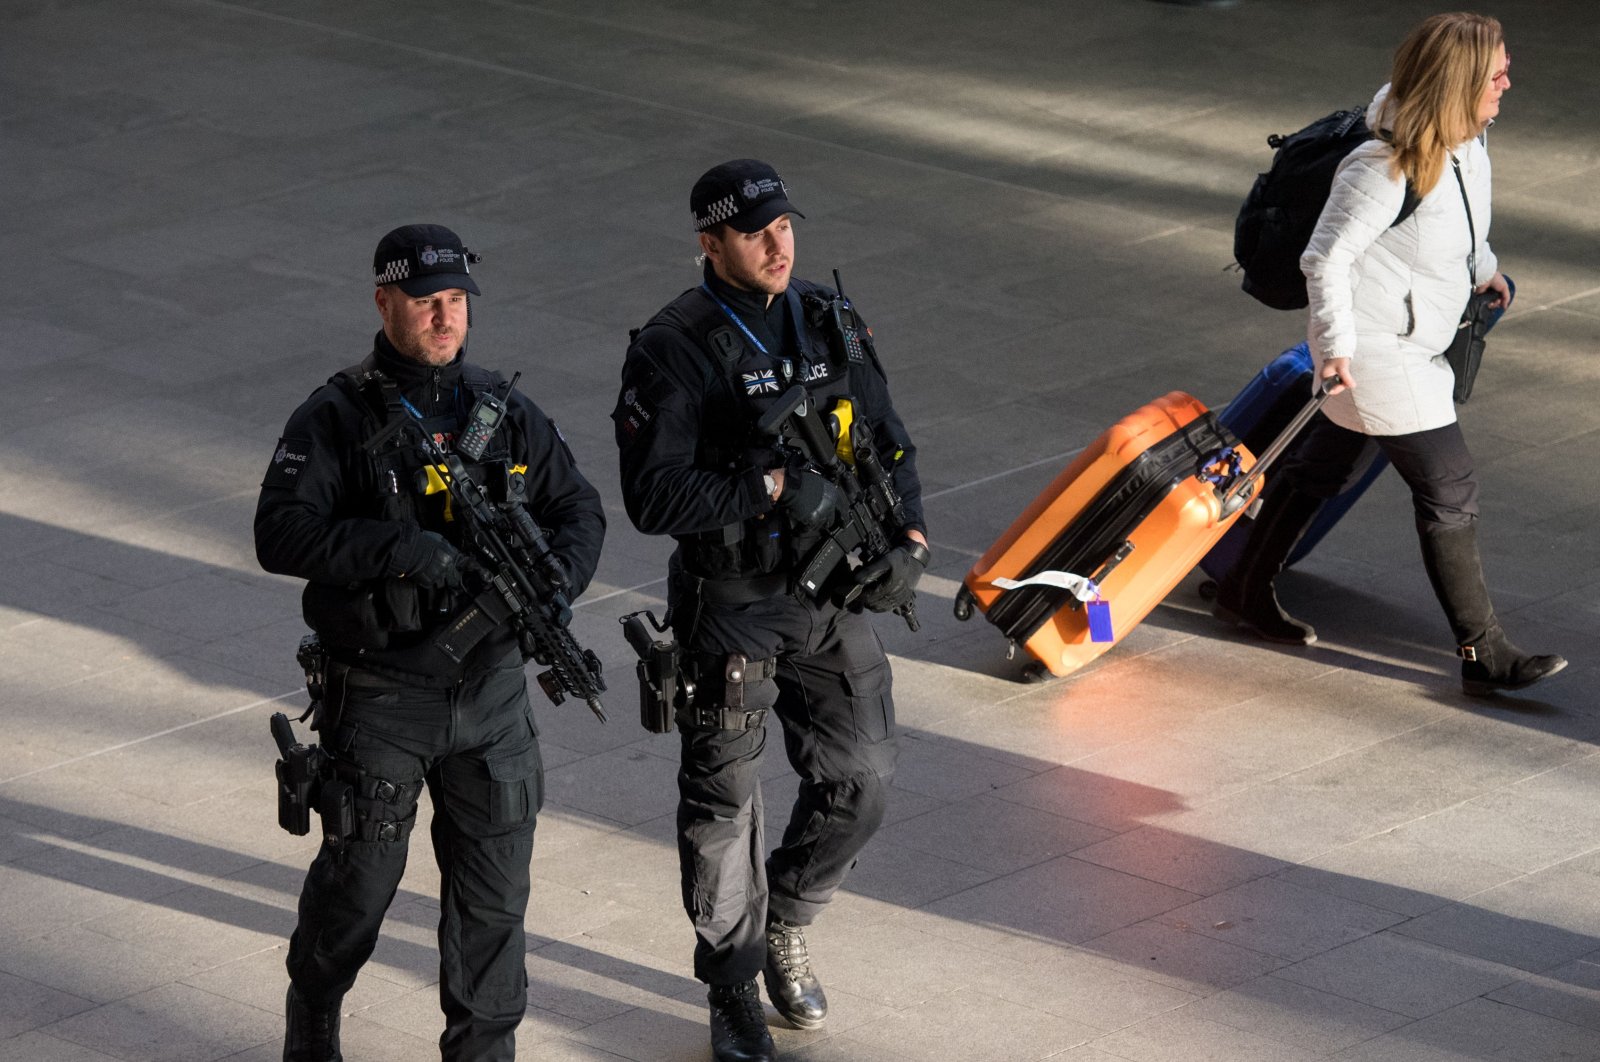 Armed British Transport Police officers on patrol at Kings Cross station in London, Dec. 19, 2017. (Reuters File Photo)